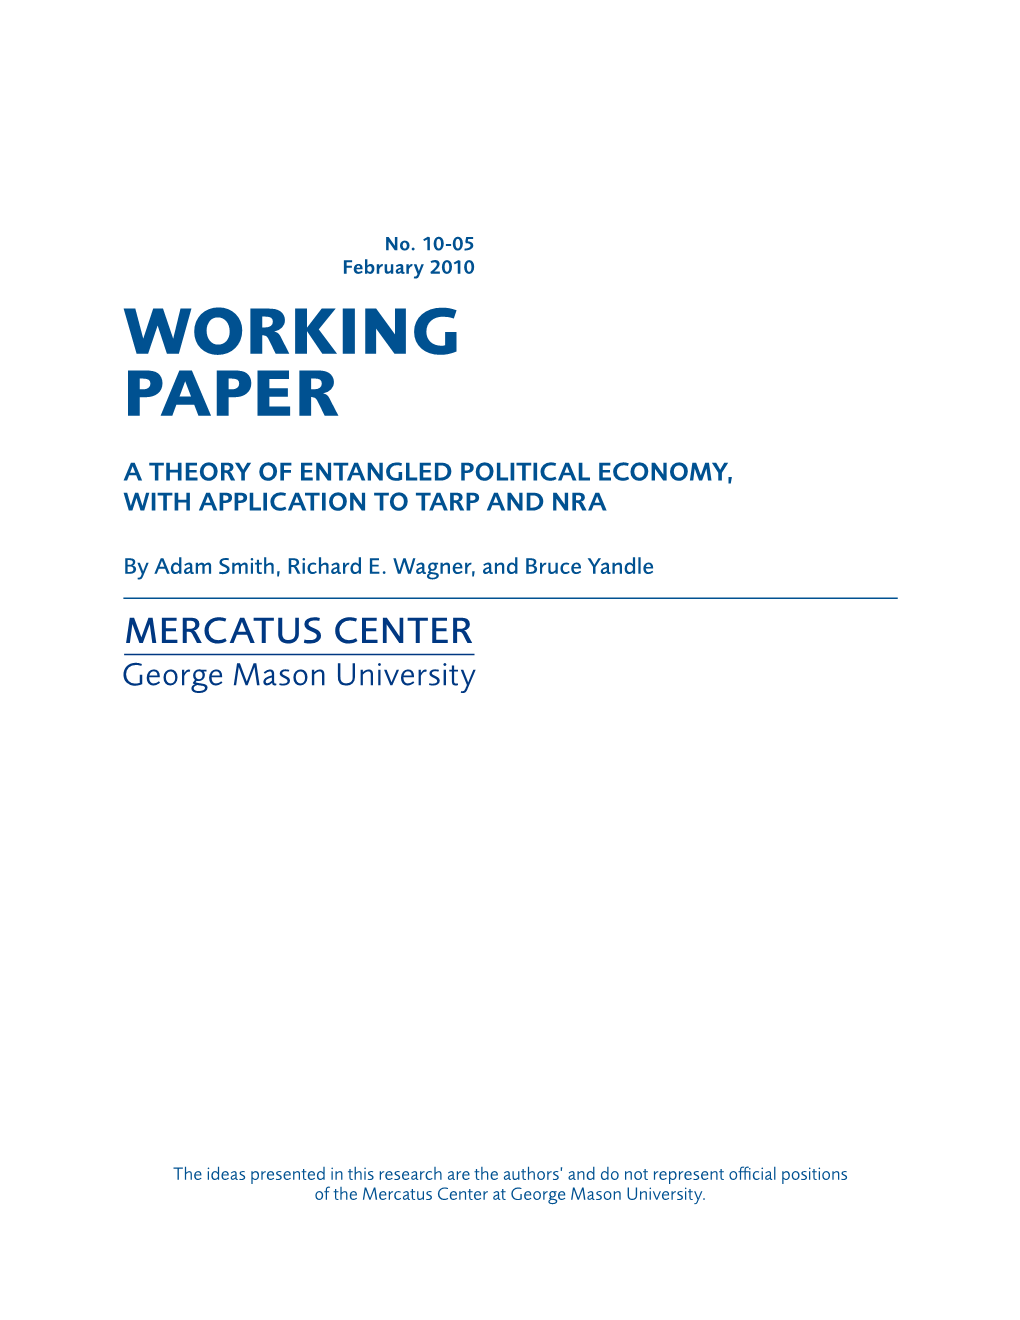 A Theory of Entangled Political Economy, with Application to TARP and NRA